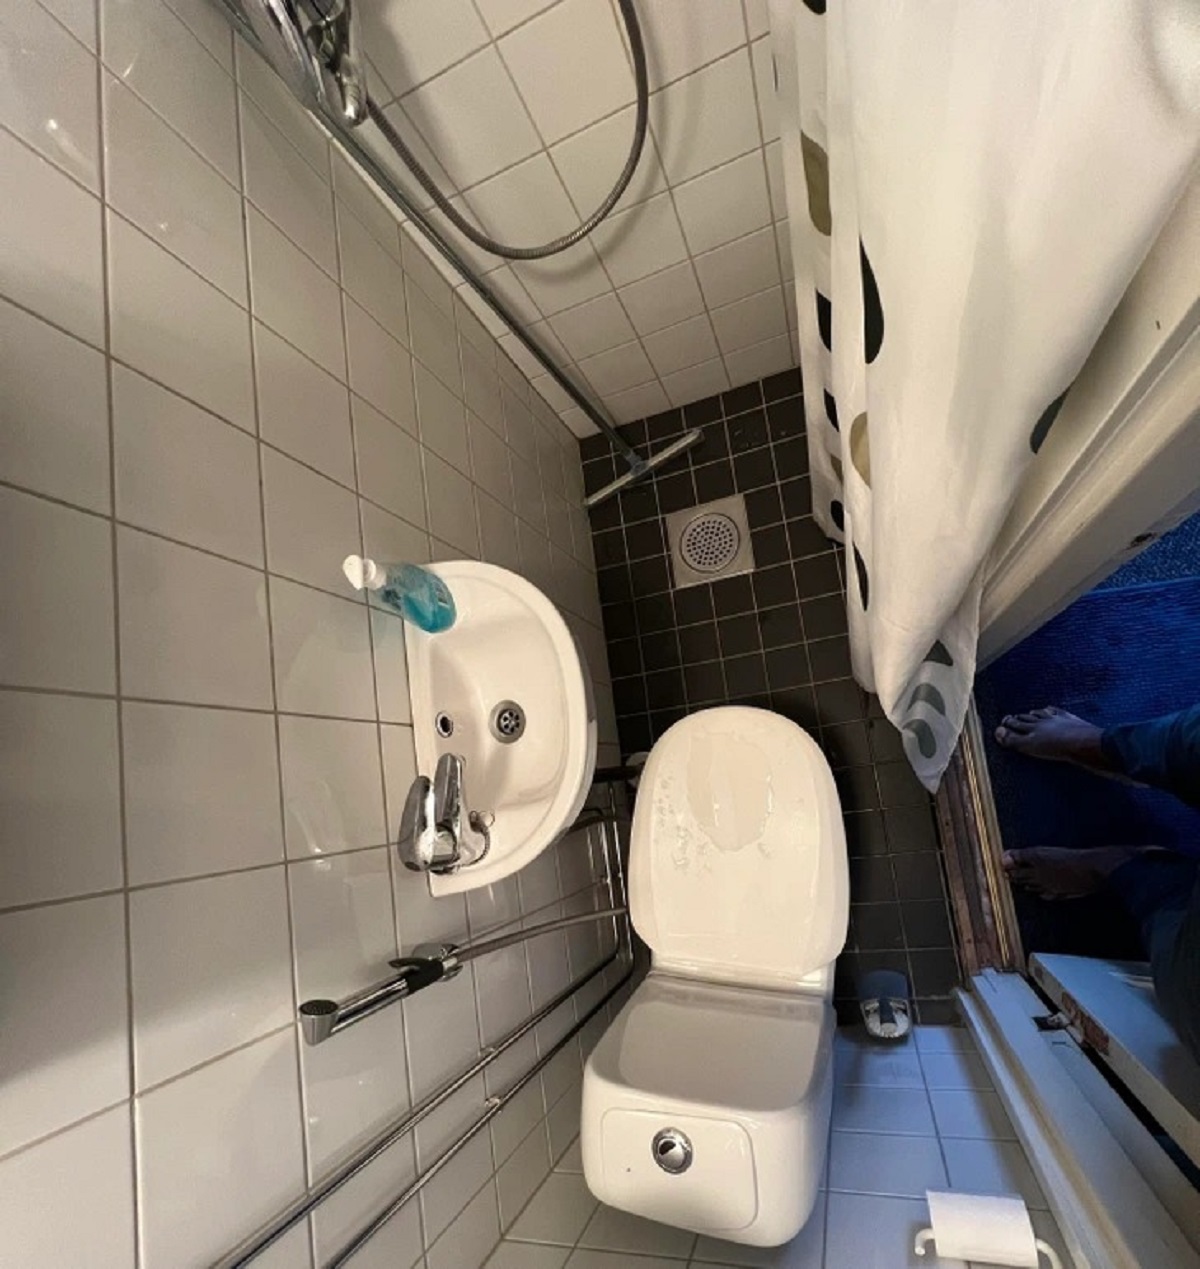 “The bathroom in my rental in Helsinki, Finland. On the bright side, I could potentially brush my teeth, shower, and drop a number 2 at the same time.”